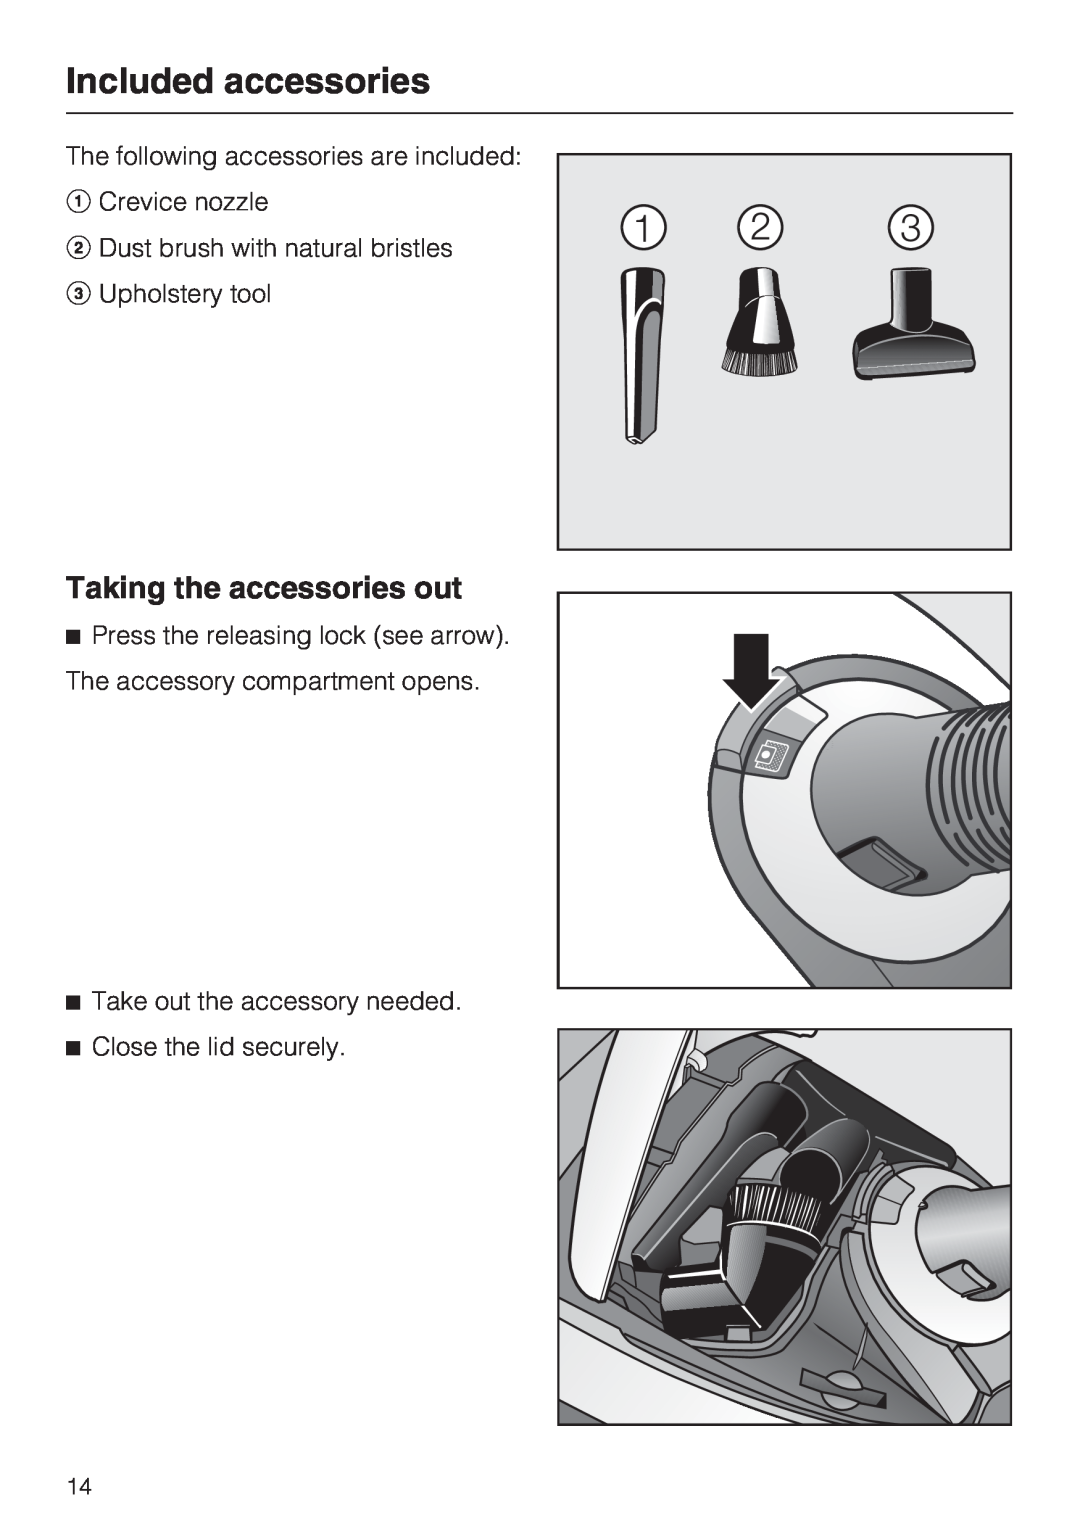 Miele S5981 operating instructions Included accessories, Taking the accessories out 